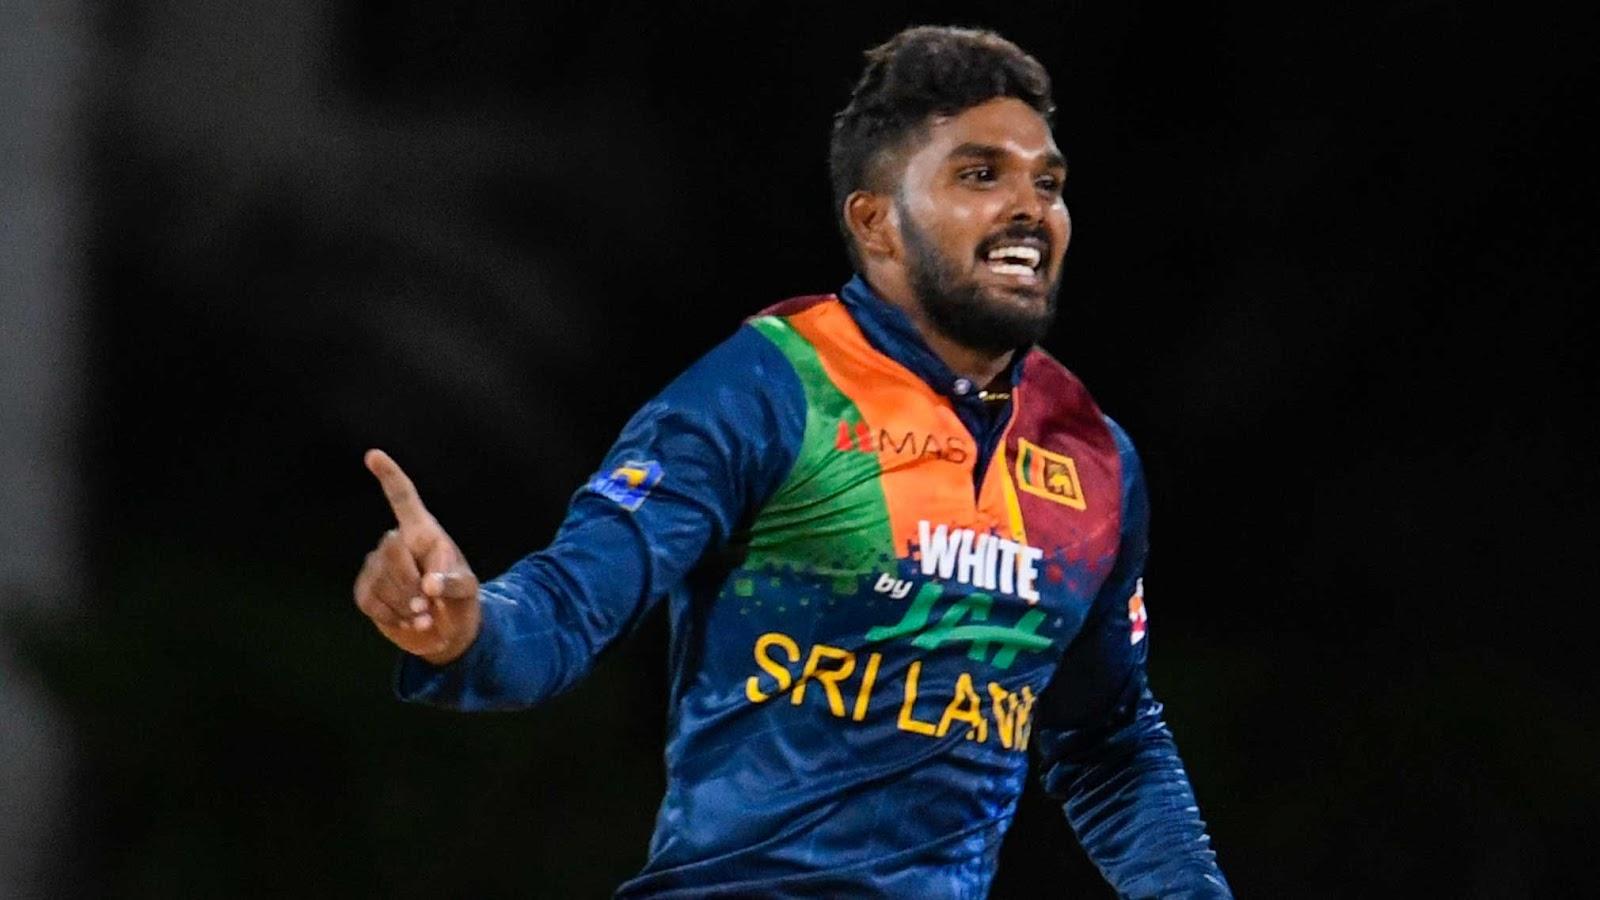 Hasaranga will be one of the players to watch out for in the series